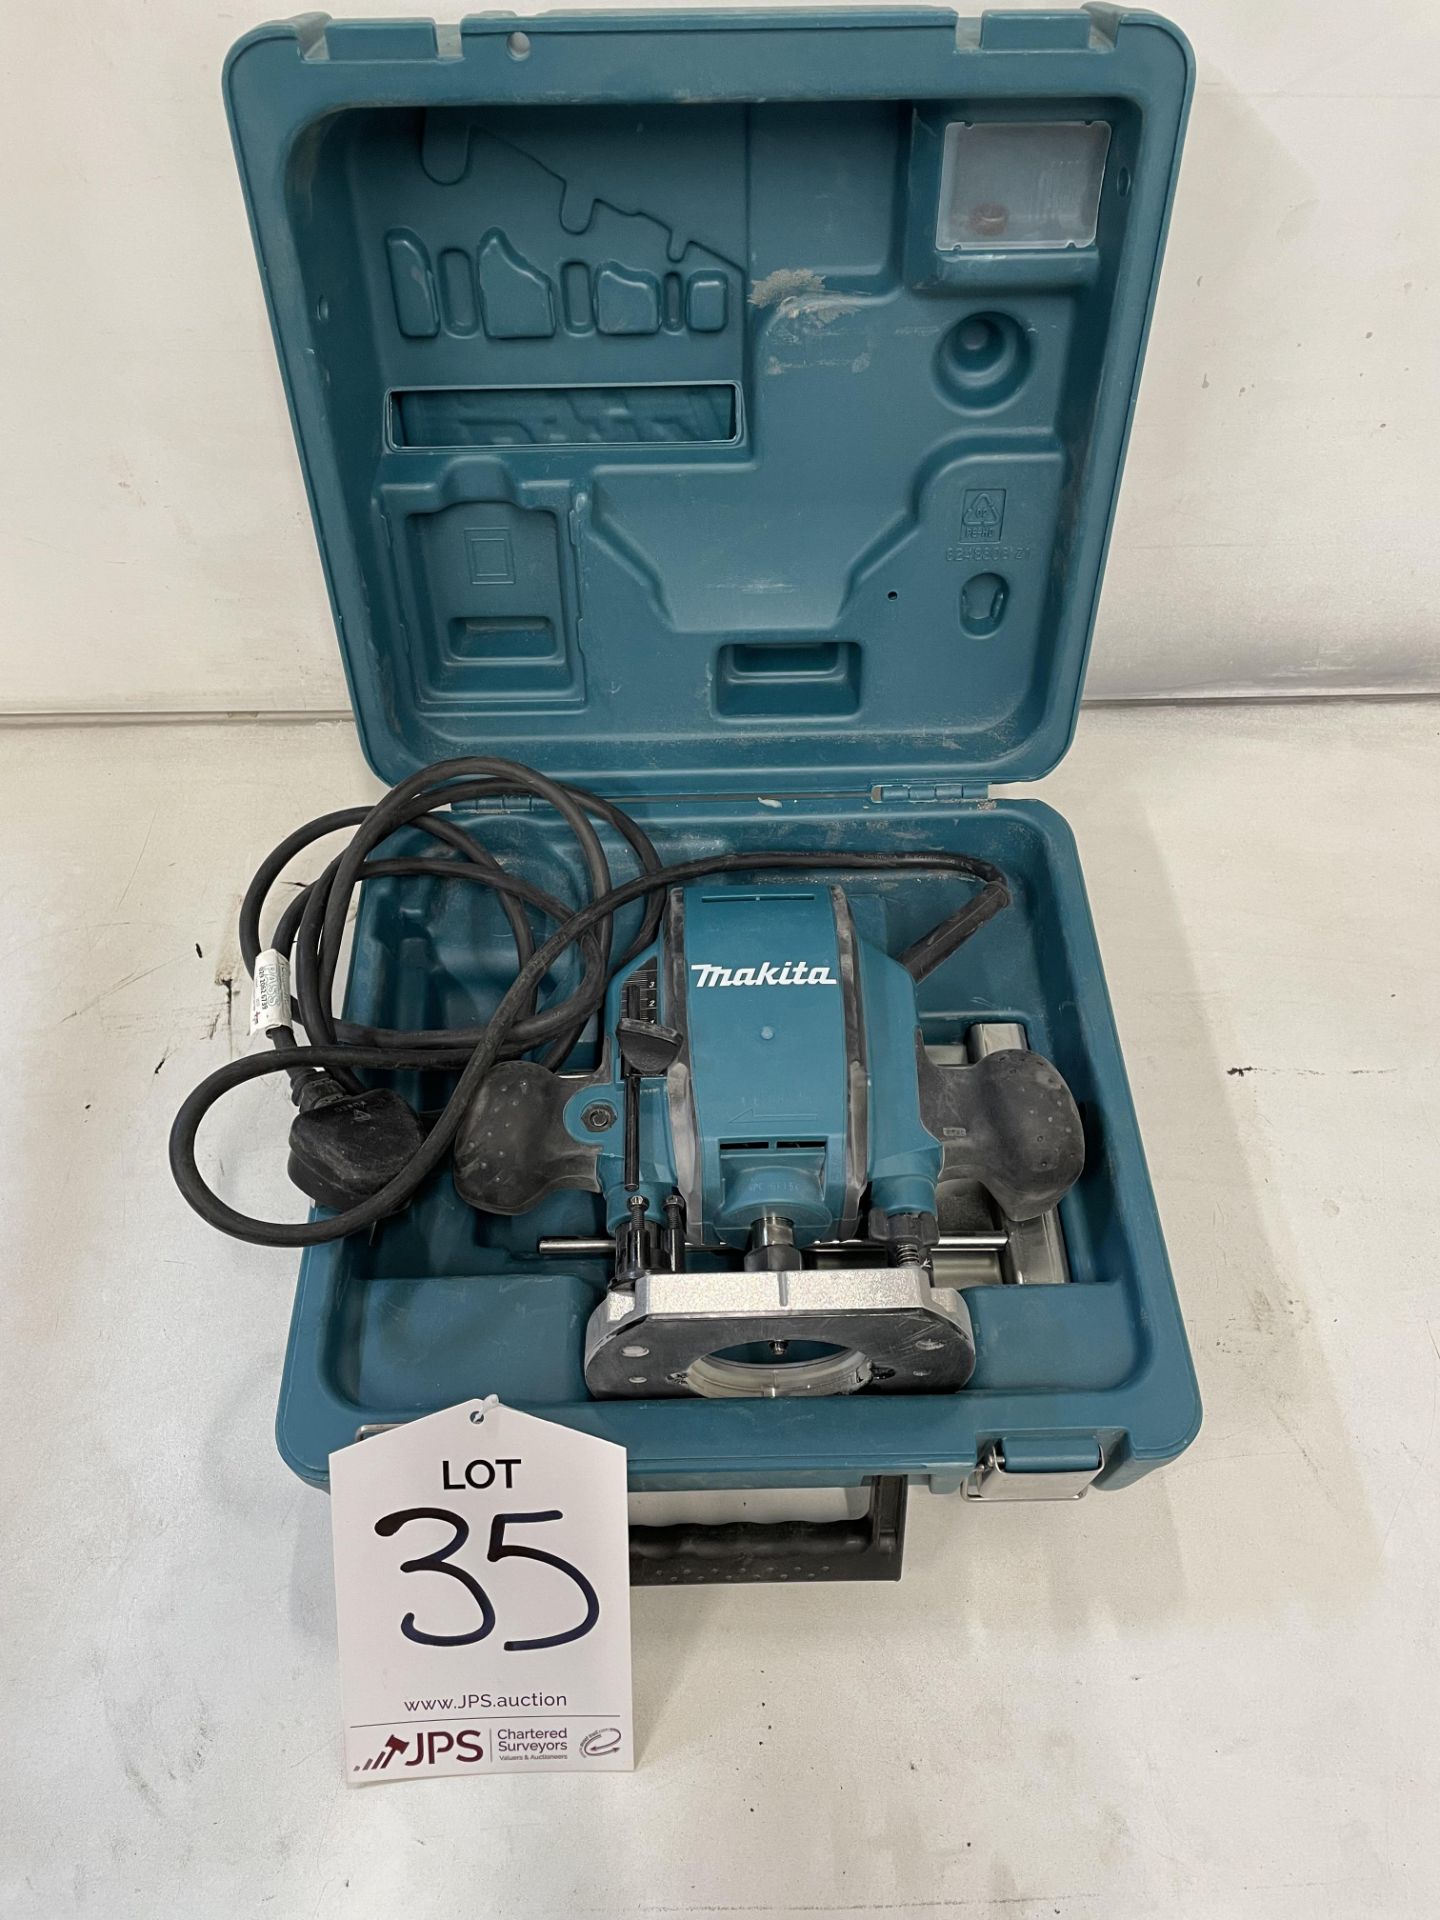 Makita RP0900 Electric Plunge Router 240V w/ Case - Image 2 of 6